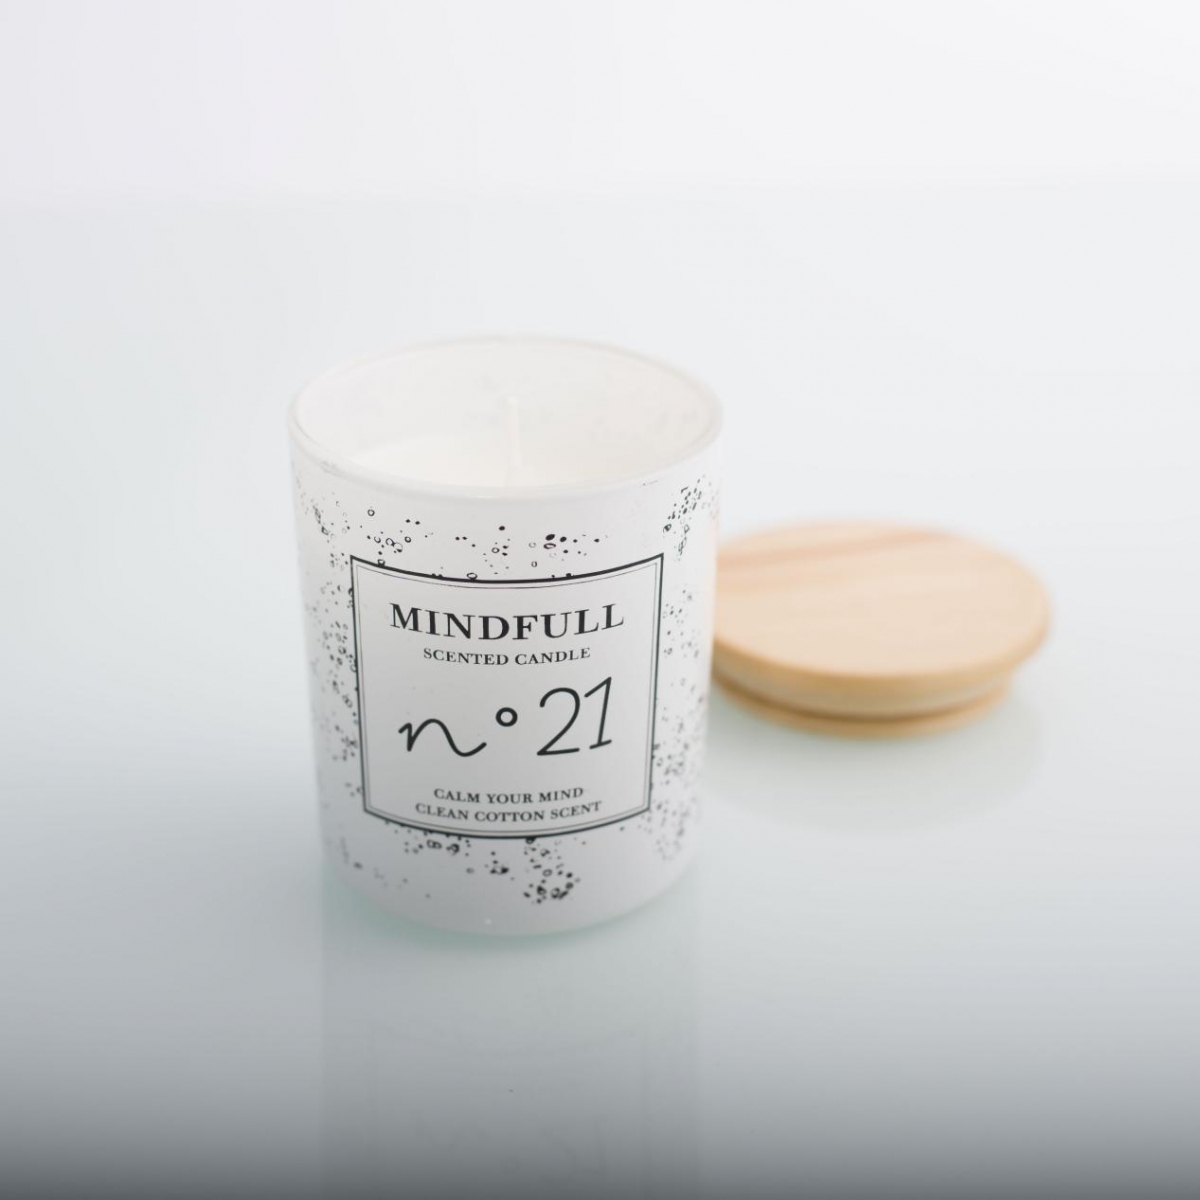 Scented Candles -Printing Design ,Glass Jar Candles ,Wood Lid ,Mindfull Candles ,China Factory ,Price-HOWCANDLE-Candles,Scented Candles,Aromatherapy Candles,Soy Candles,Vegan Candles,Jar Candles,Pillar Candles,Candle Gift Sets,Essential Oils,Reed Diffuser,Candle Holder,